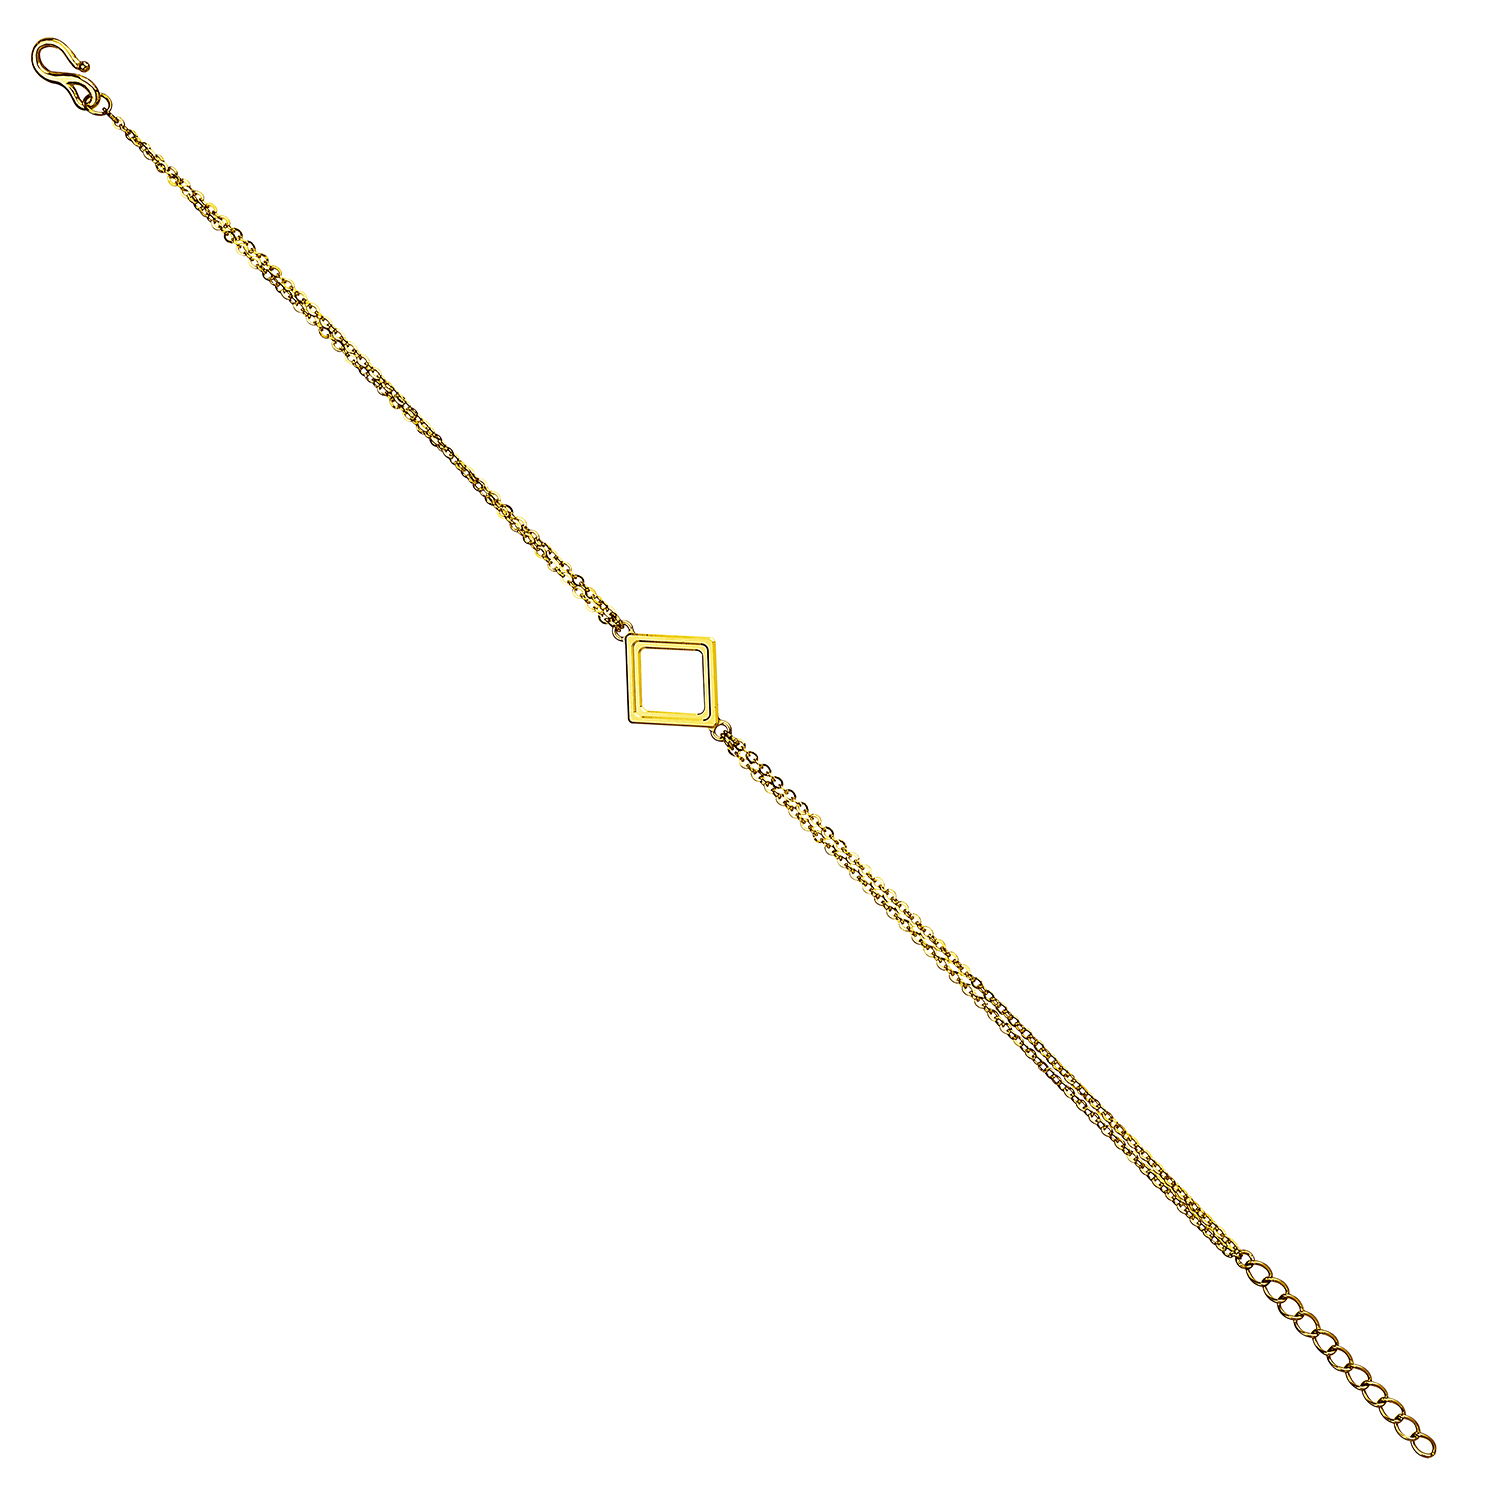 Gold of Light and Shadow Square Bracelet